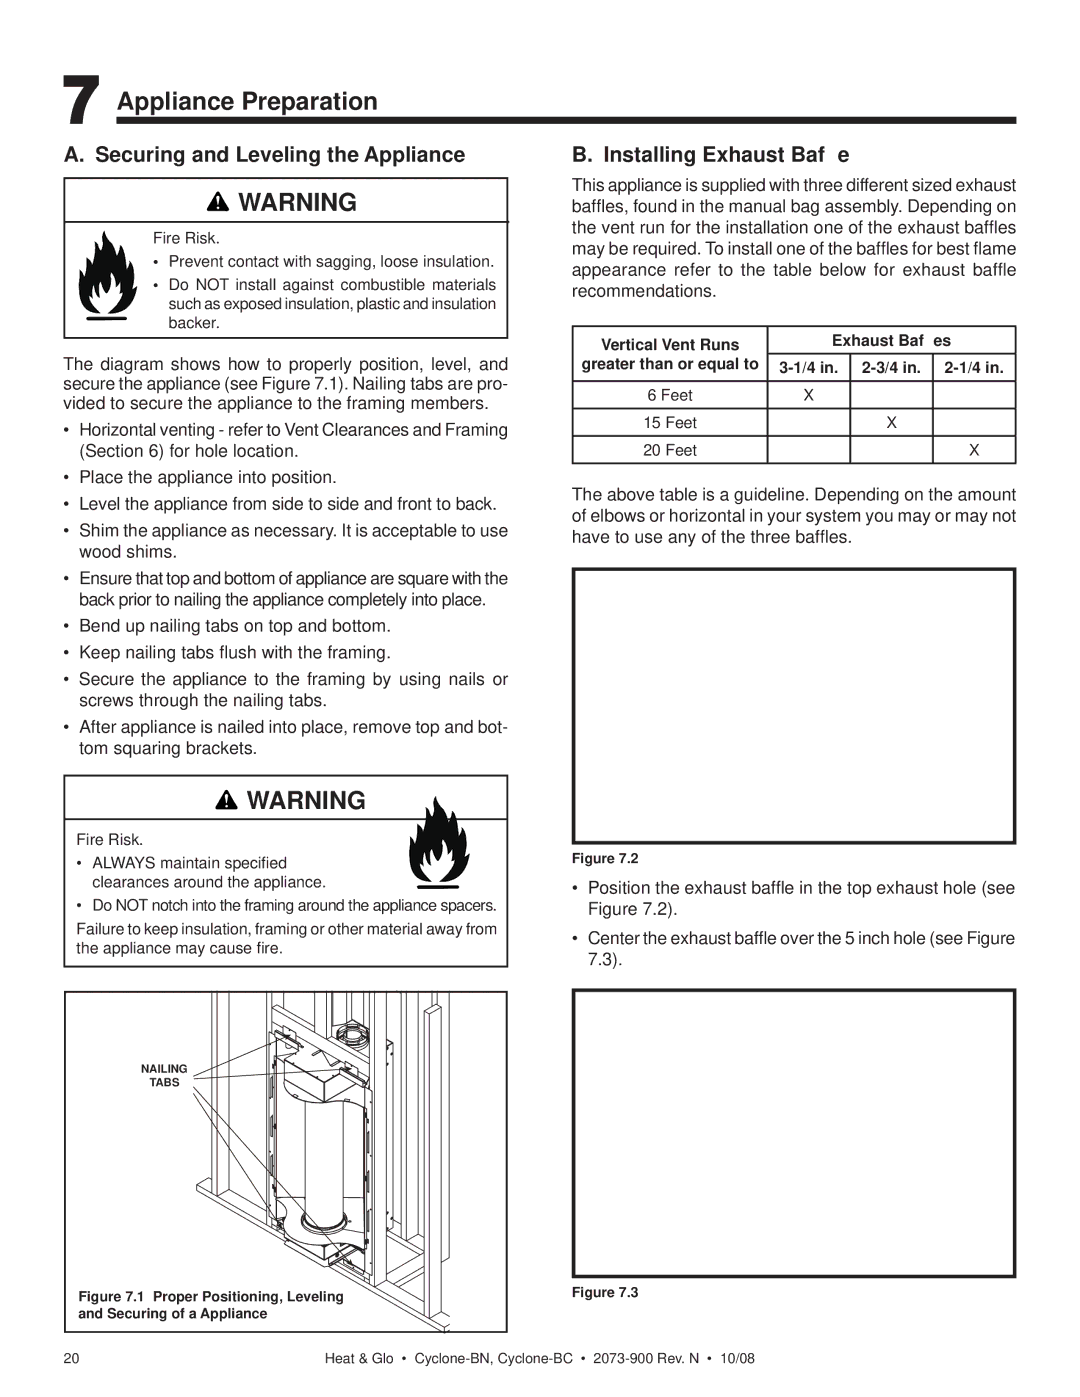 Hearth and Home Technologies Cyclone-BC, Cyclone-BN owner manual Appliance Preparation, Securing and Leveling the Appliance 